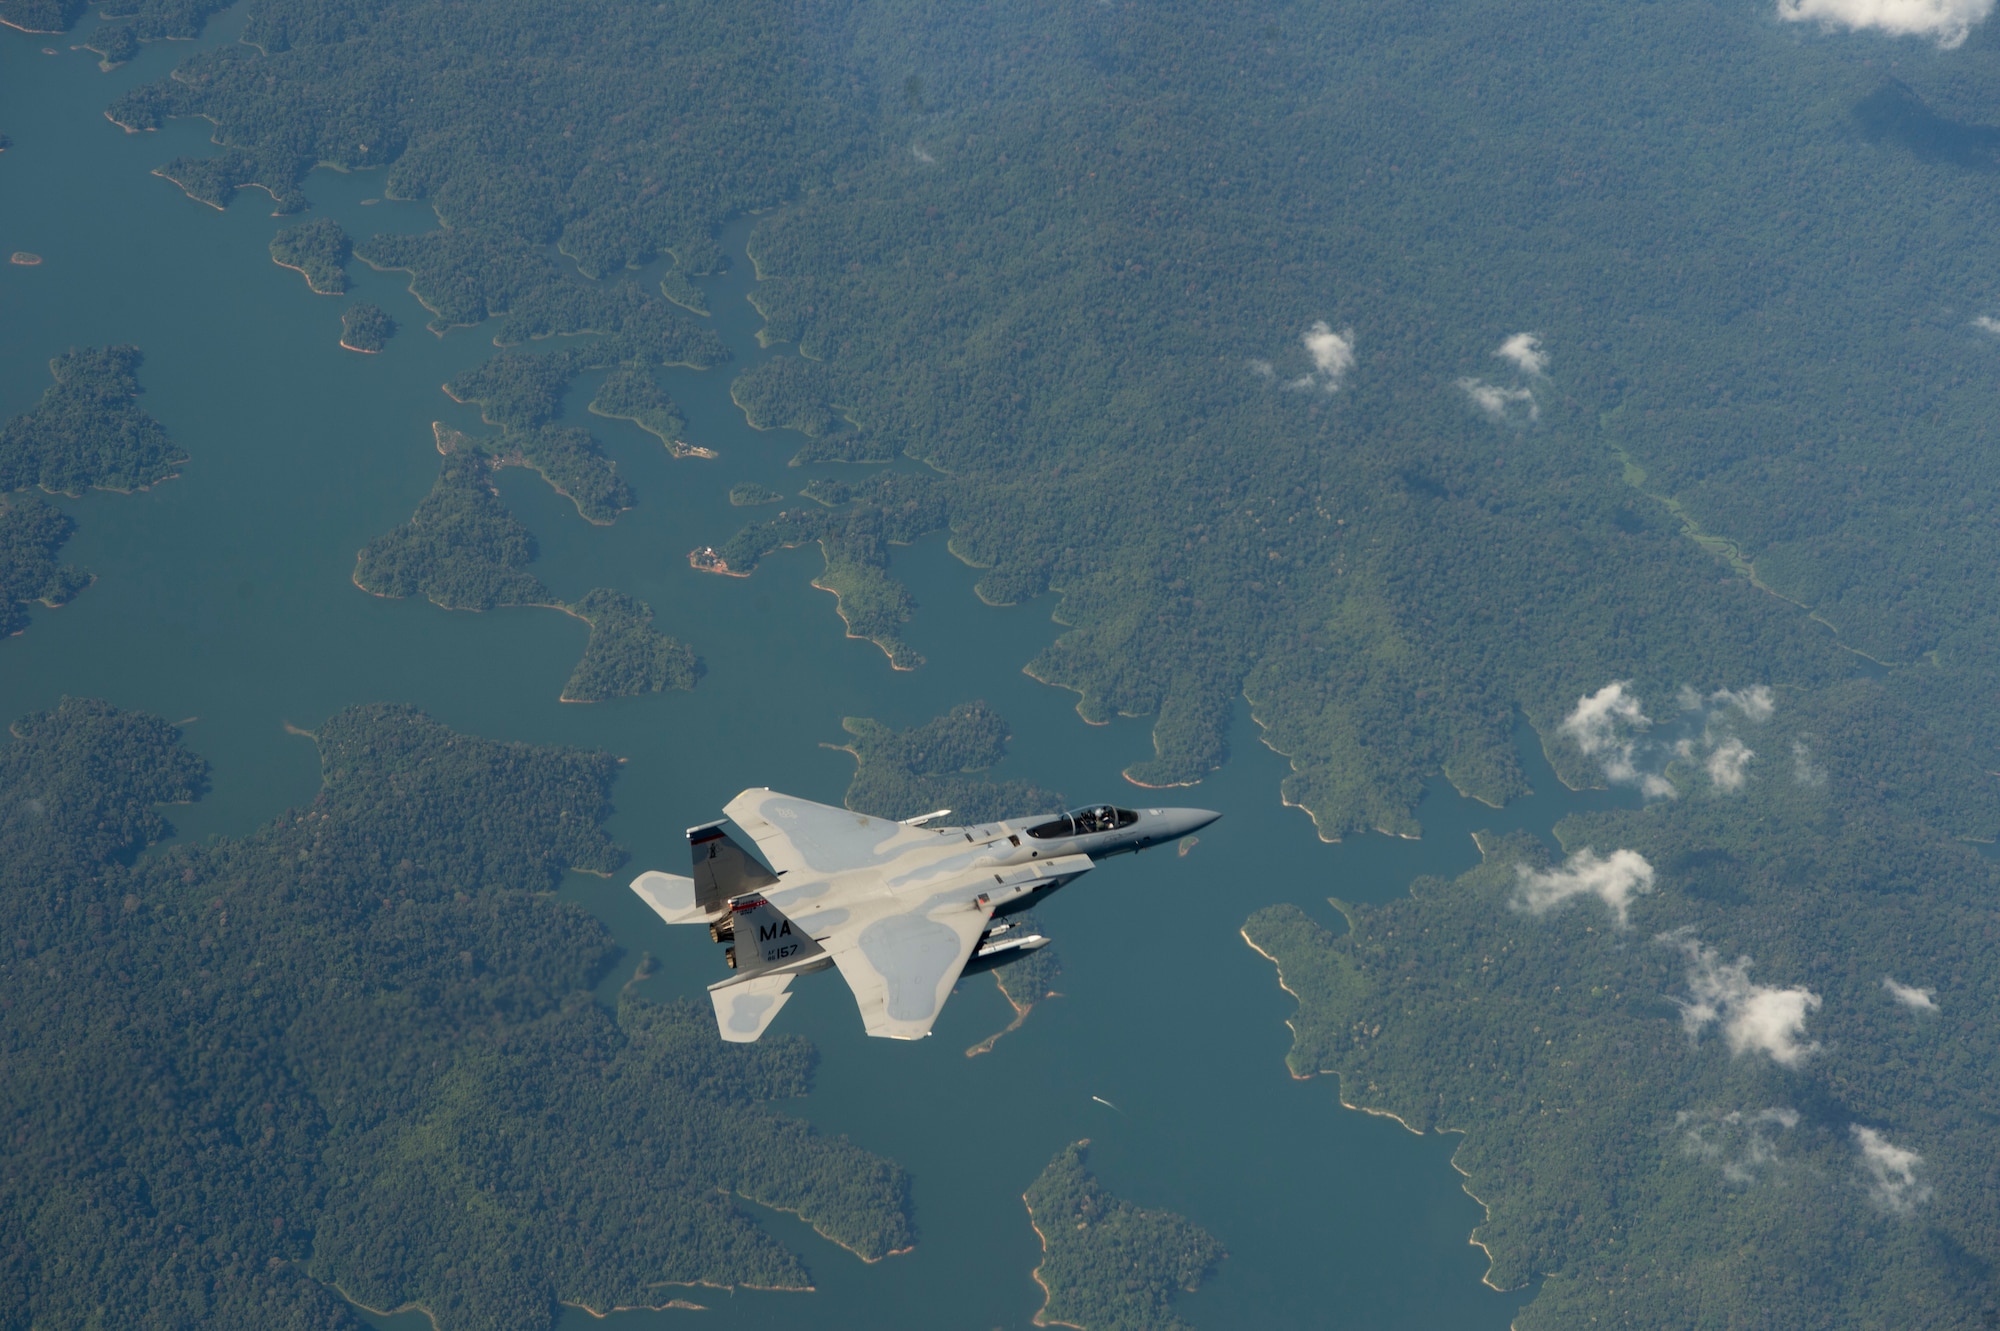 A U.S. Air Force F-15 Eagle from the 131st Fighter Squadron, 104th Fighter Wing, Barnes Air National Guard Base, Mass., flies over Penang, Malaysia, during Cope Taufan 14, June 18, 2014. Cope Taufan is a biennial large force employment exercise taking place June 9 to 20 designed to improve U.S. and Malaysian combined readiness. (U.S. Air Force photo by Tech. Sgt. Jason Robertson/Released) 